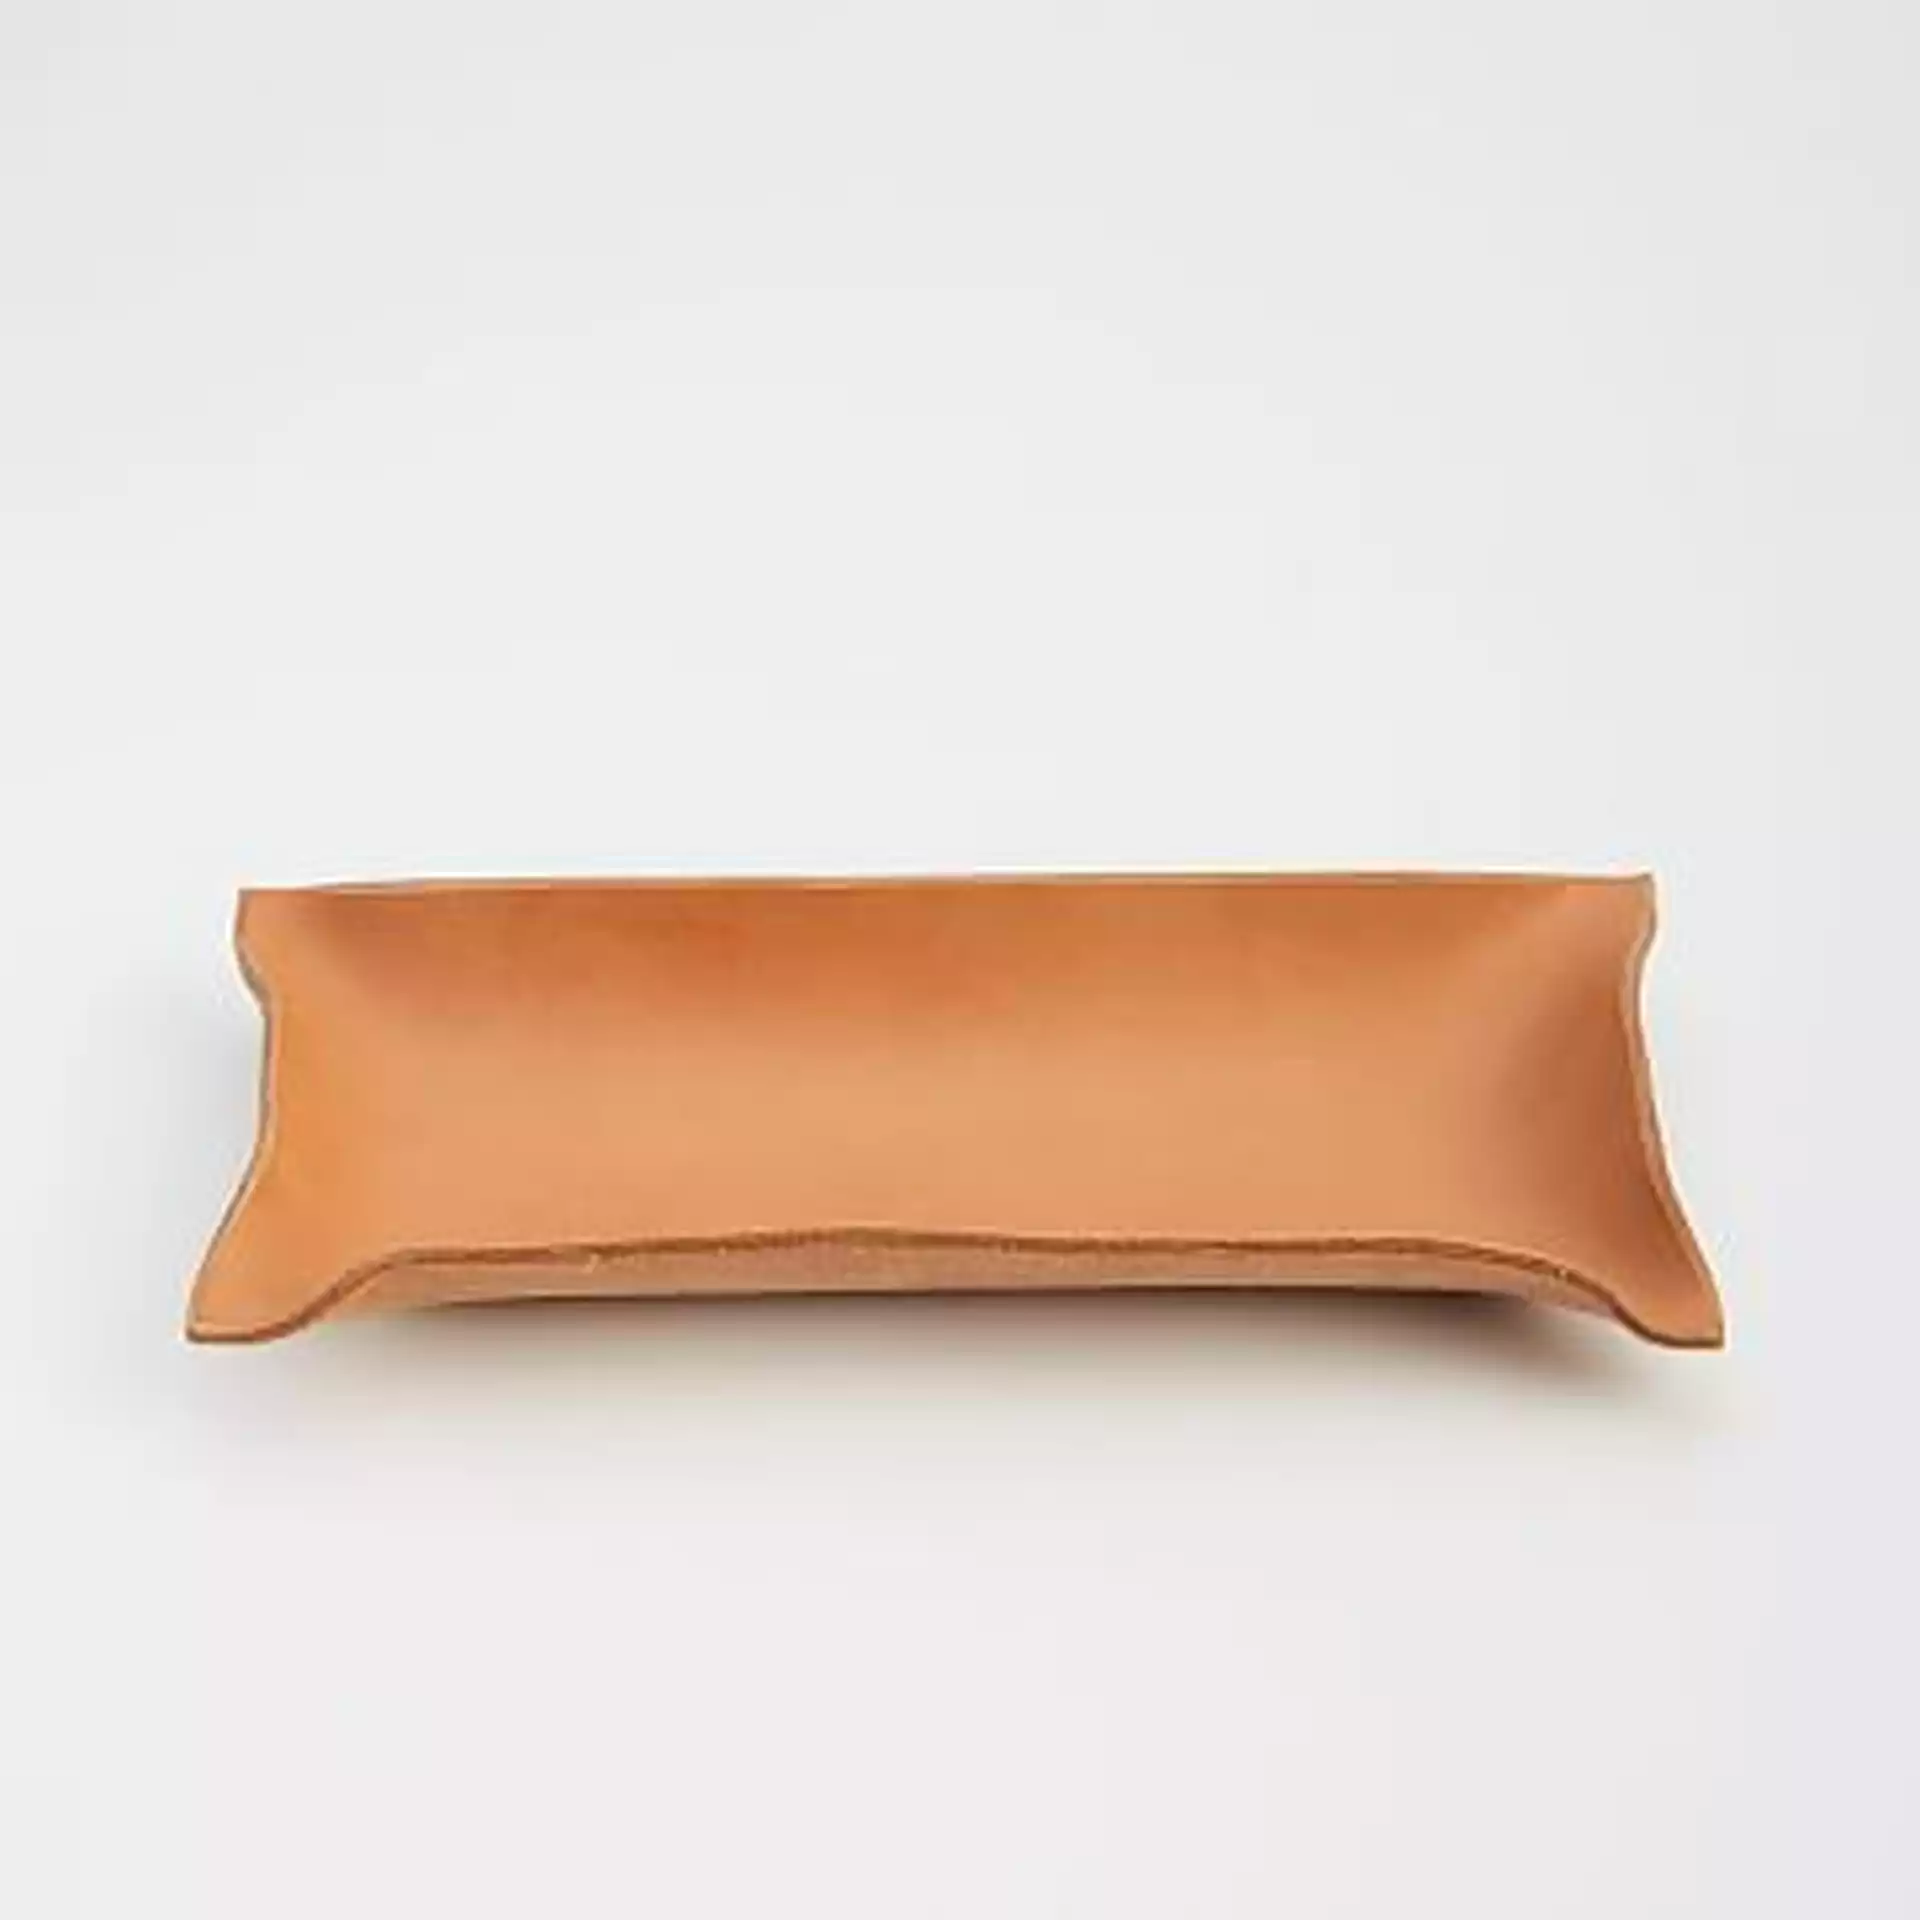 Made Solid Hand-Shaped Leather Tray, 4.5"x4.5"